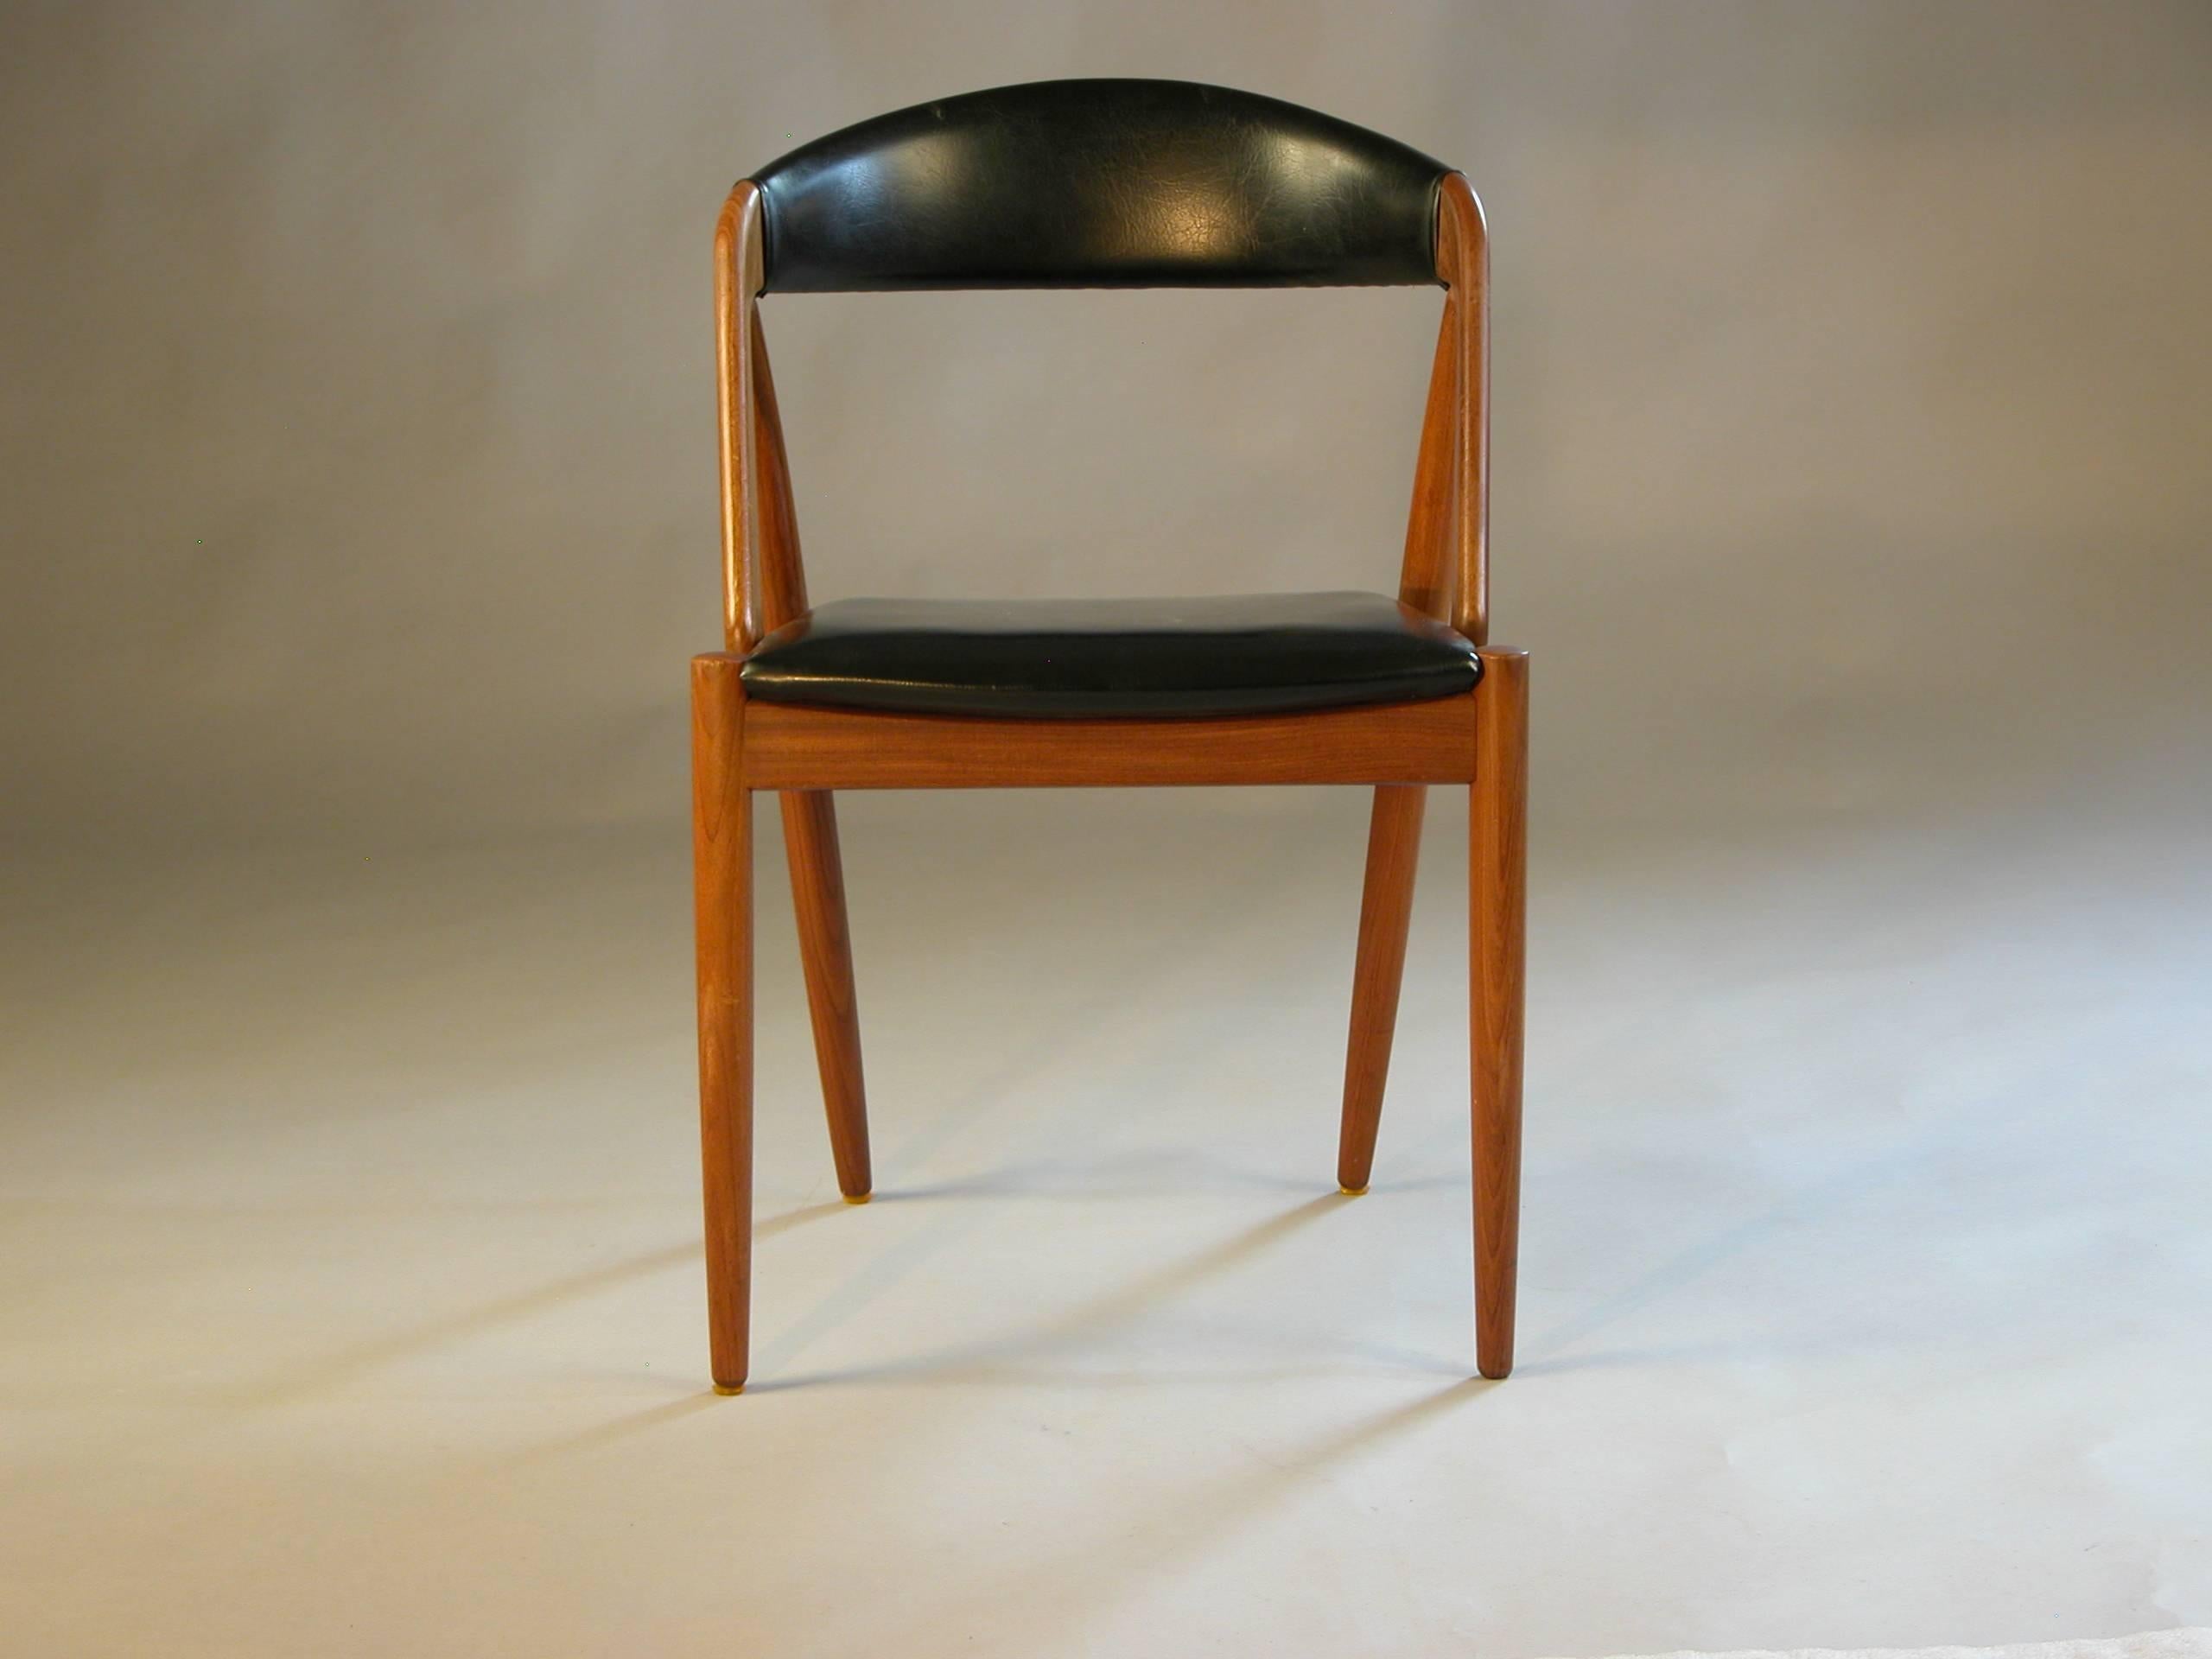 Kai Kristiansens model 31 dining chairs with refinished frames and leatherette upholstery.

If you wish to have the chairs reupholstered we are happy to make an offer and reupholster them with fabric or leather within two weeks.

If you are